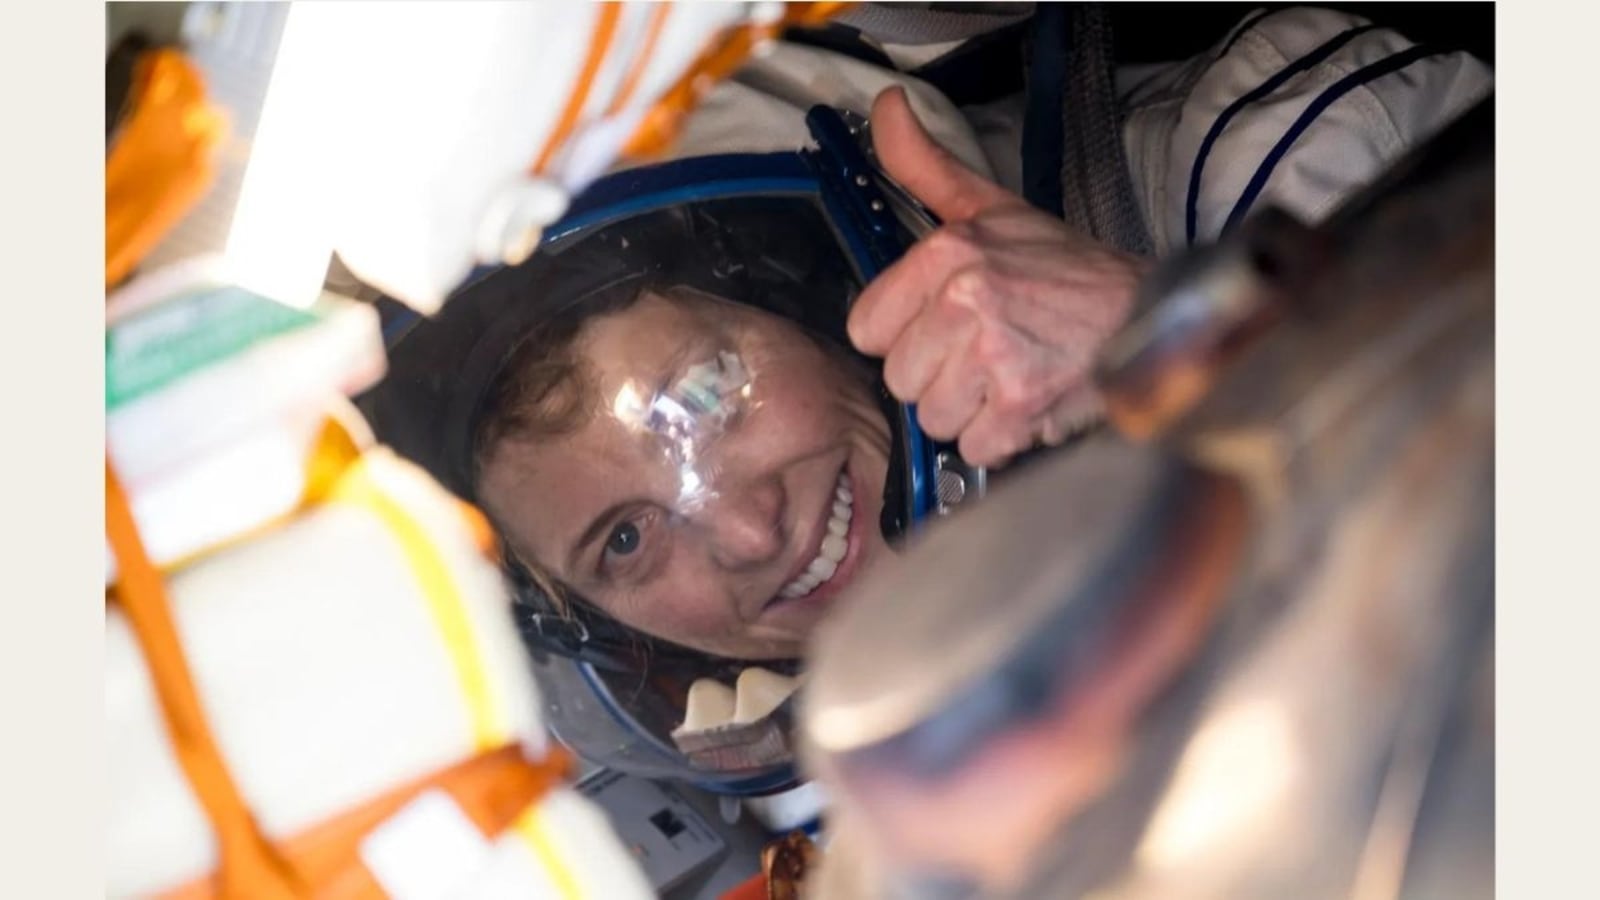 NASA Astronaut Loral O’Hara and crew safely and securely land again once more on Earth instantly after 6-months place station mission